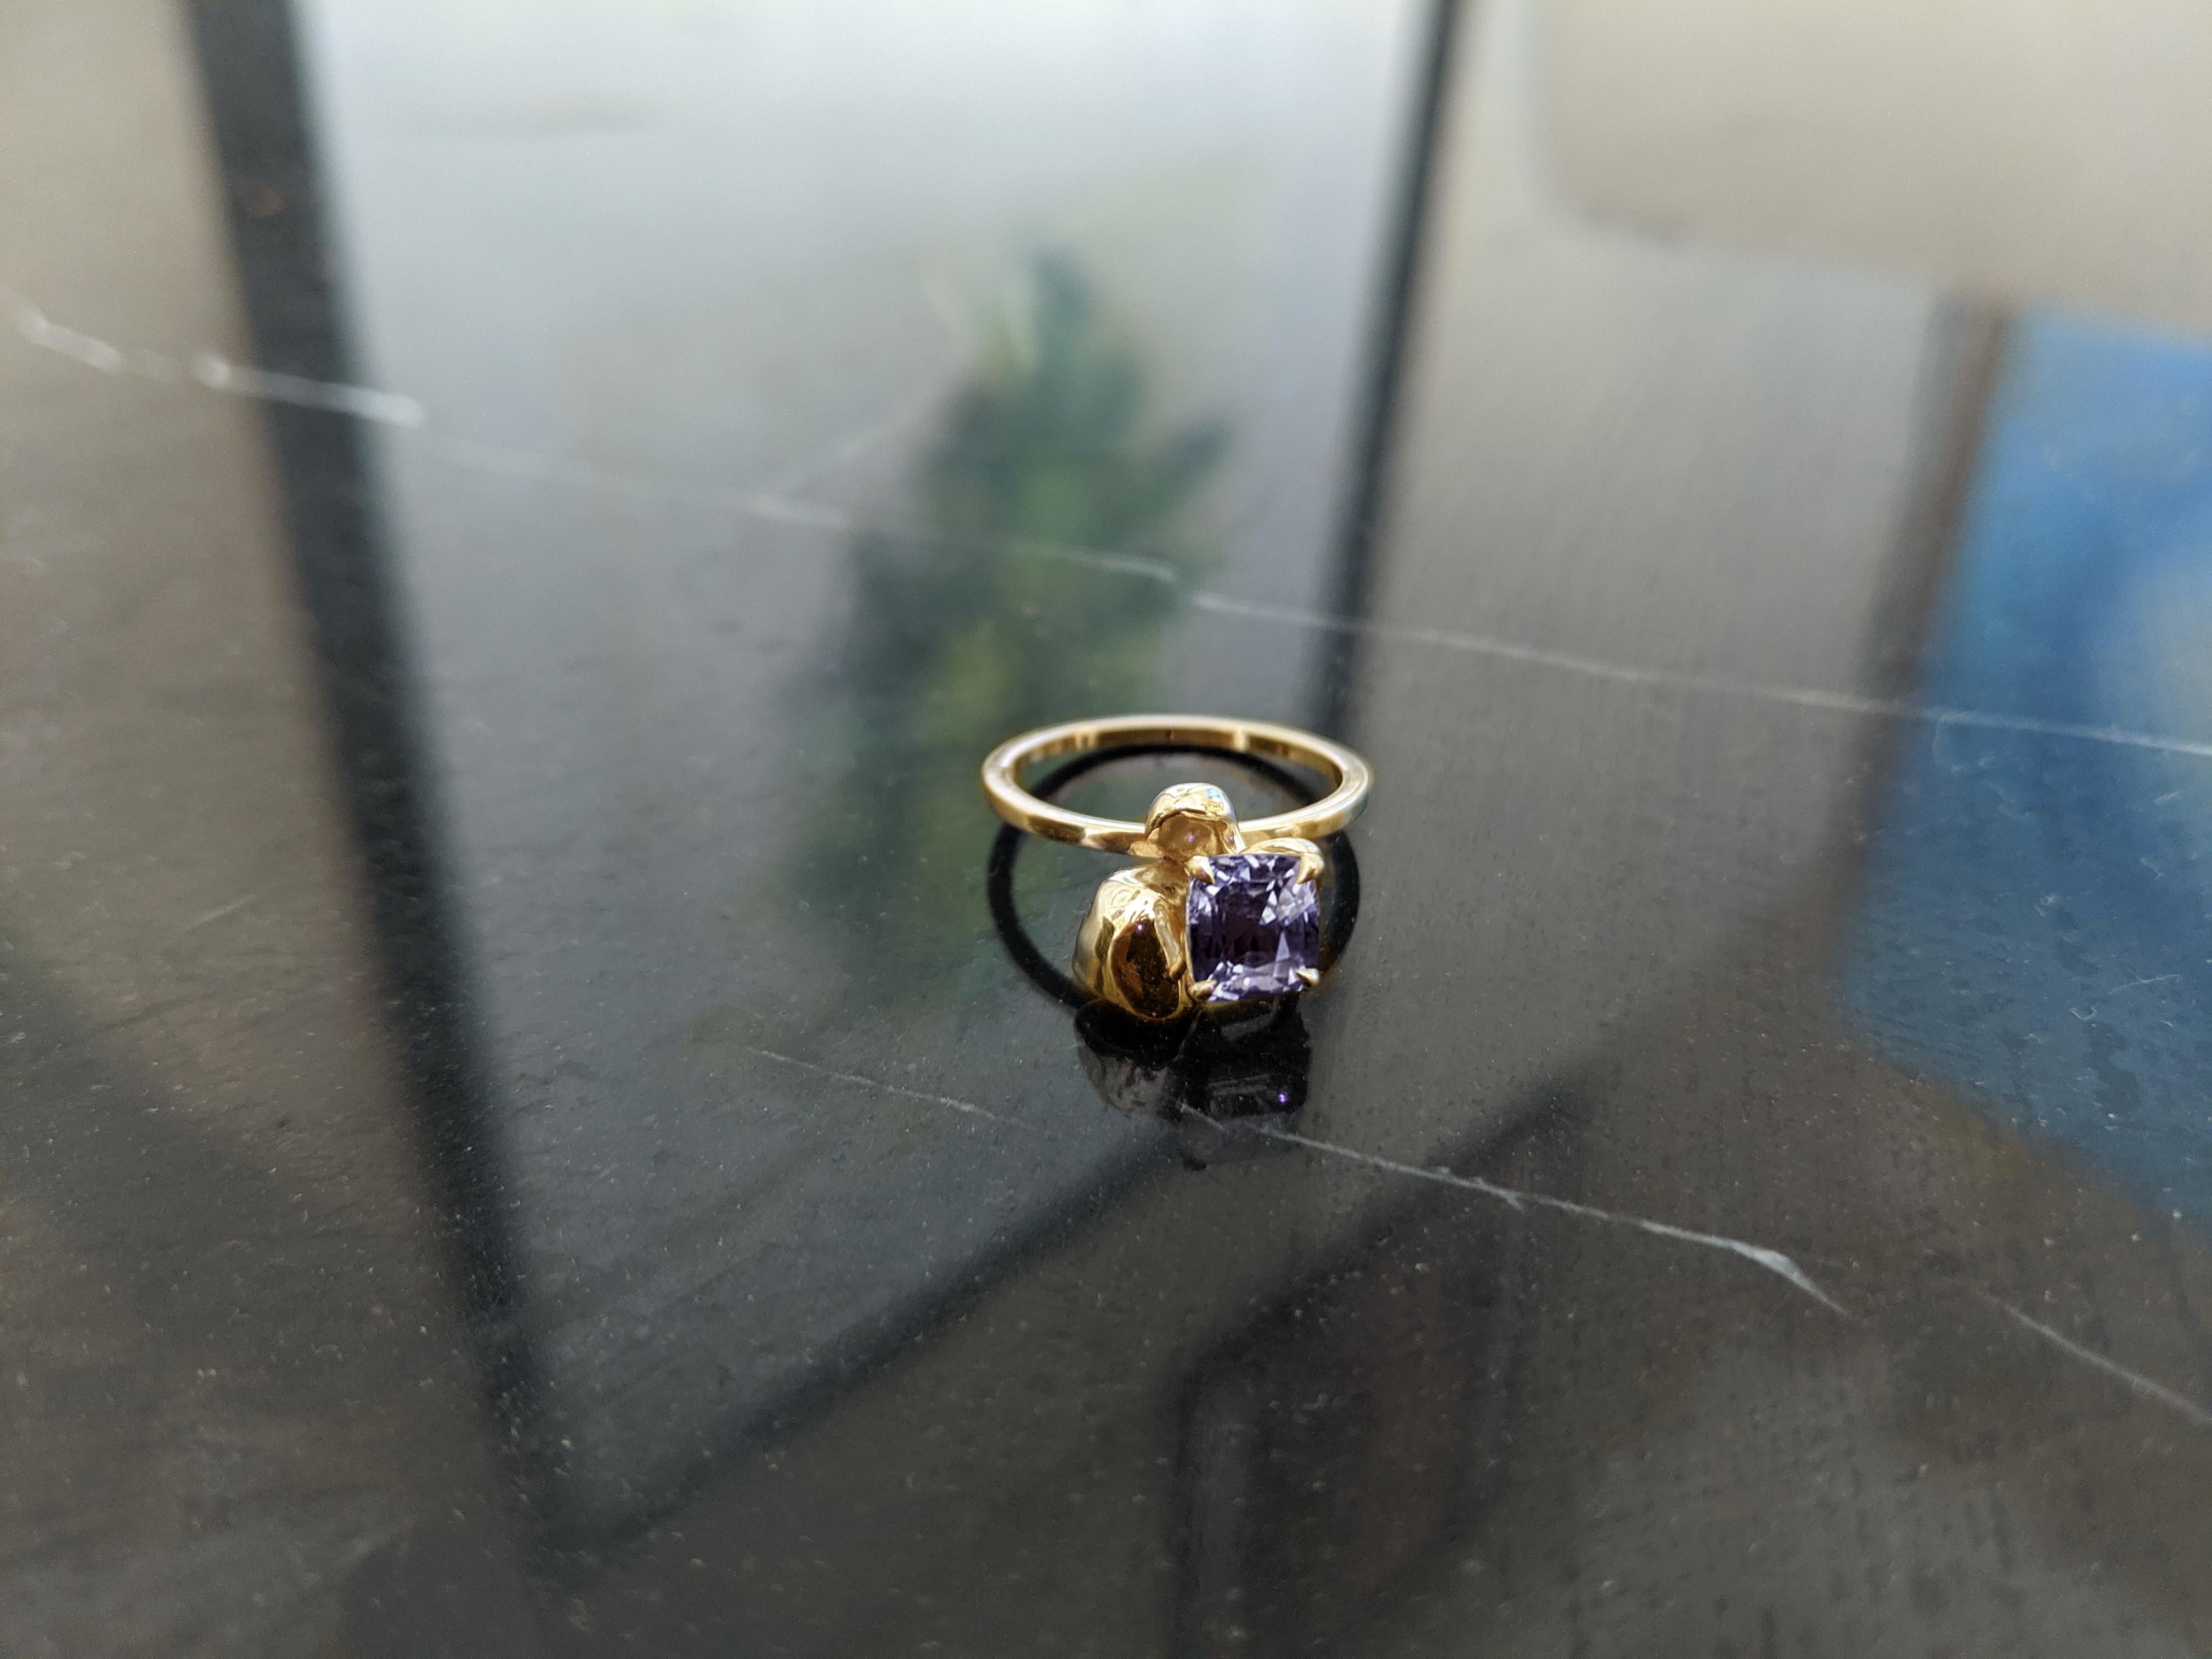 This Buttercup Flower contemporary ring is a beautiful piece of jewelry, crafted from 18 karat rose gold and encrusted with a natural cushion purple spinel, weighing 1.34 carats. The ring is designed by the oil painter from Berlin, Polya